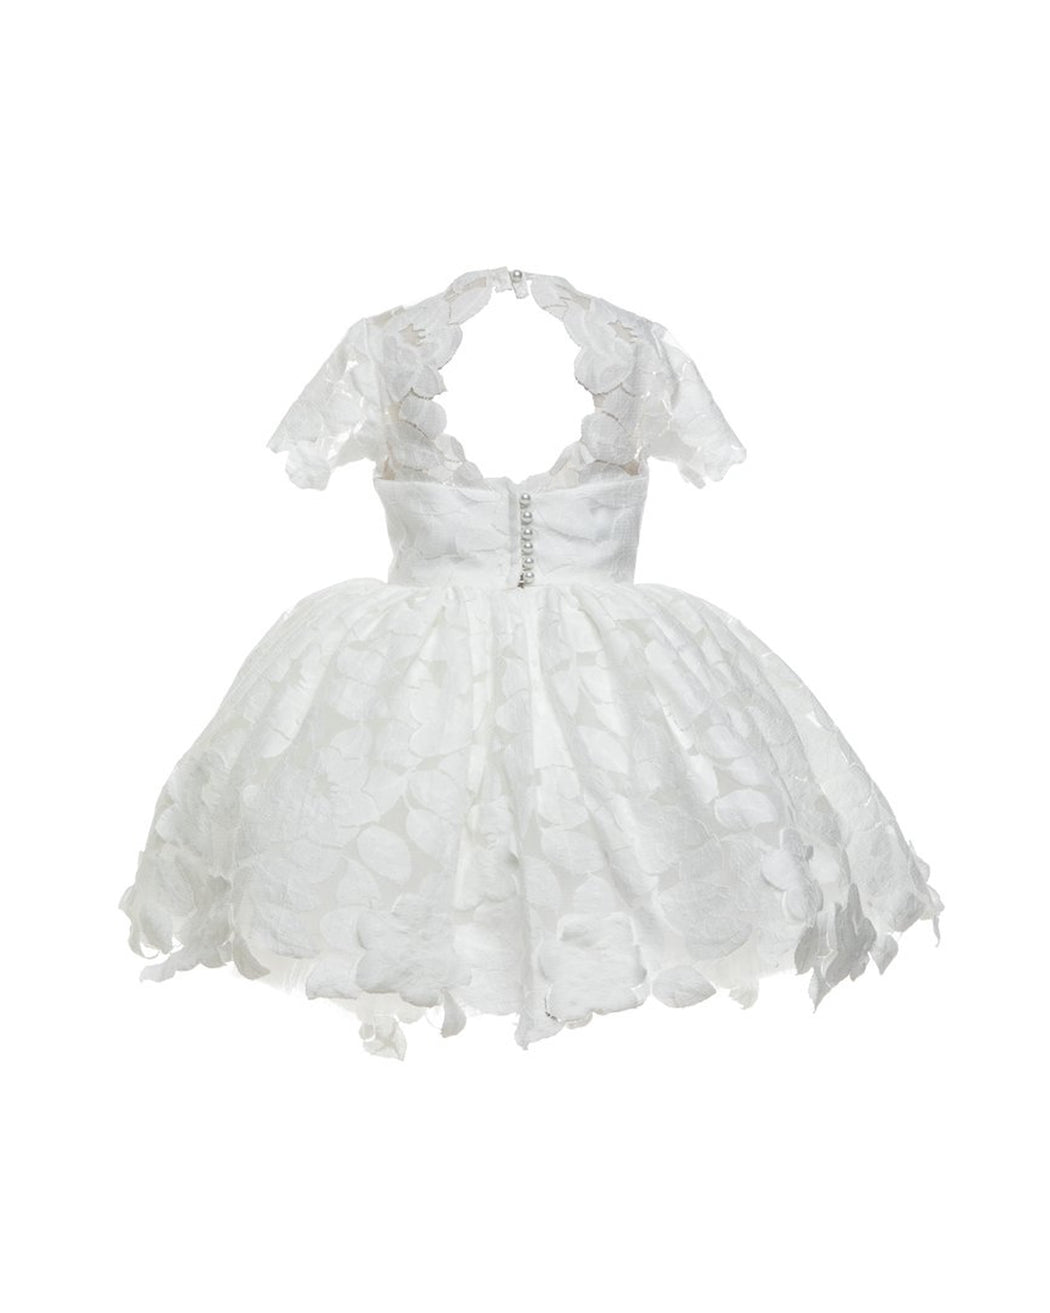 The Baby Annabelle-Baby Dress-Doloris Petunia